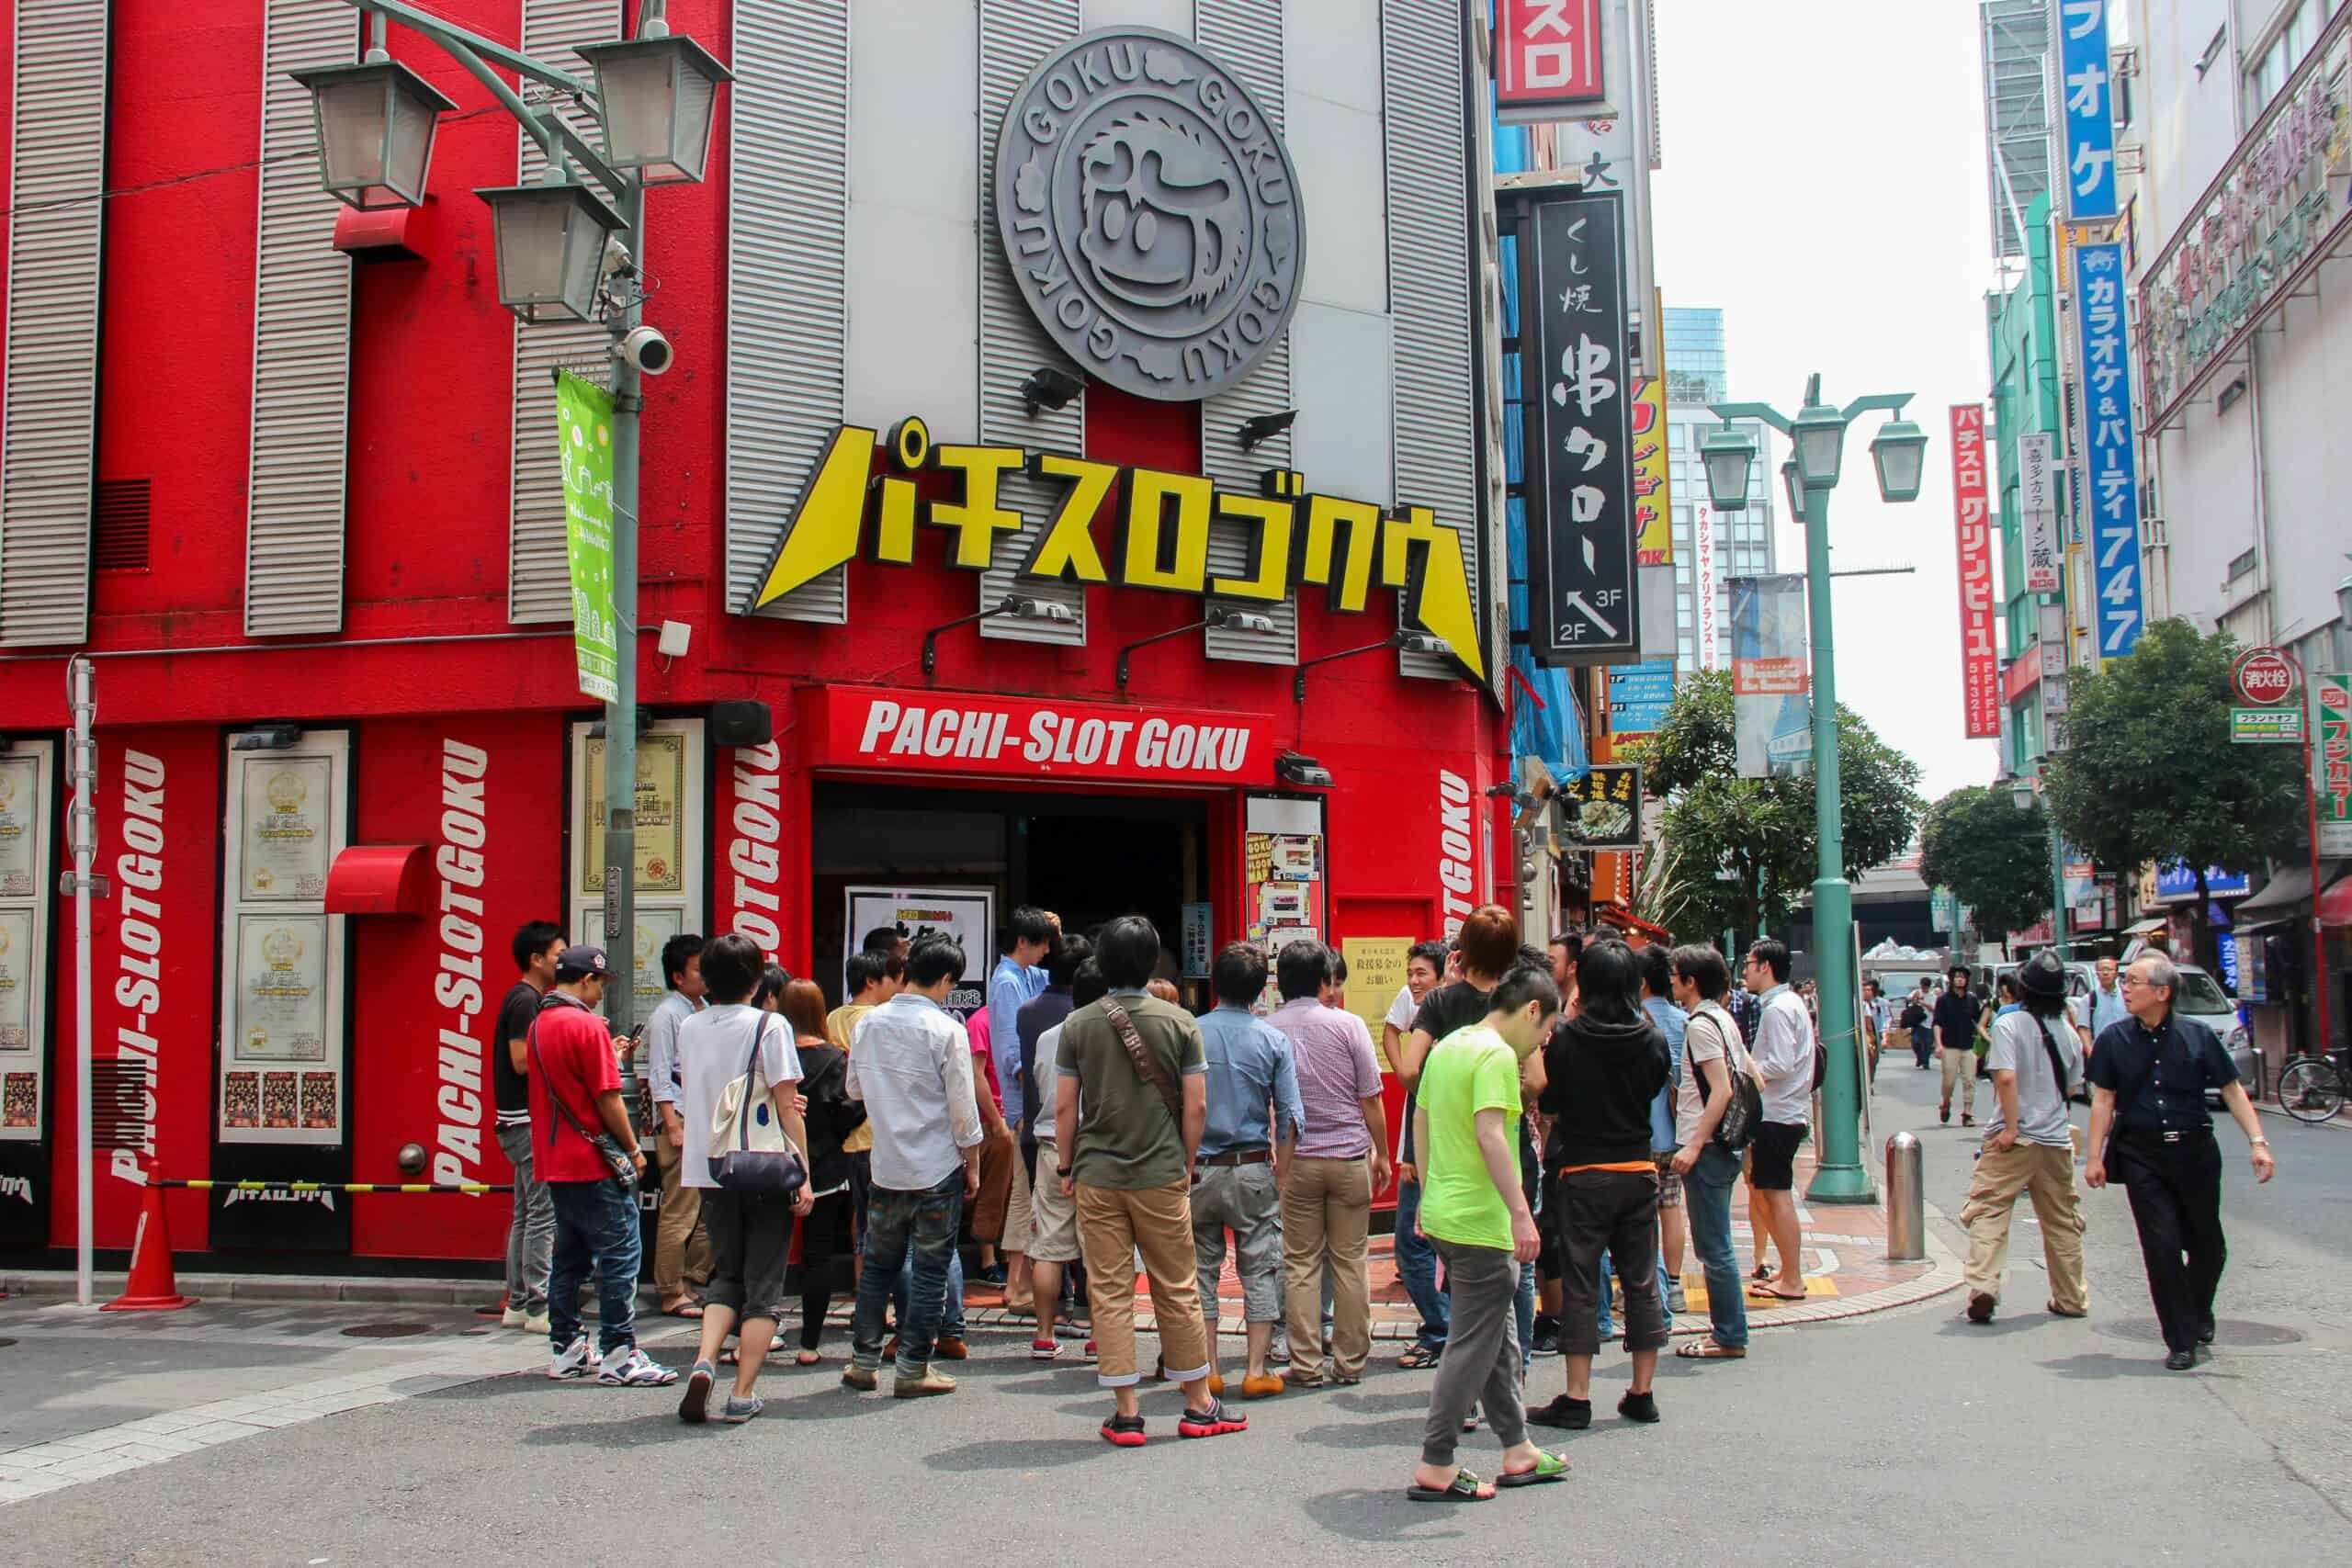 A group of people gather outside a red Pachinko slot machine arcade in Tokyo.